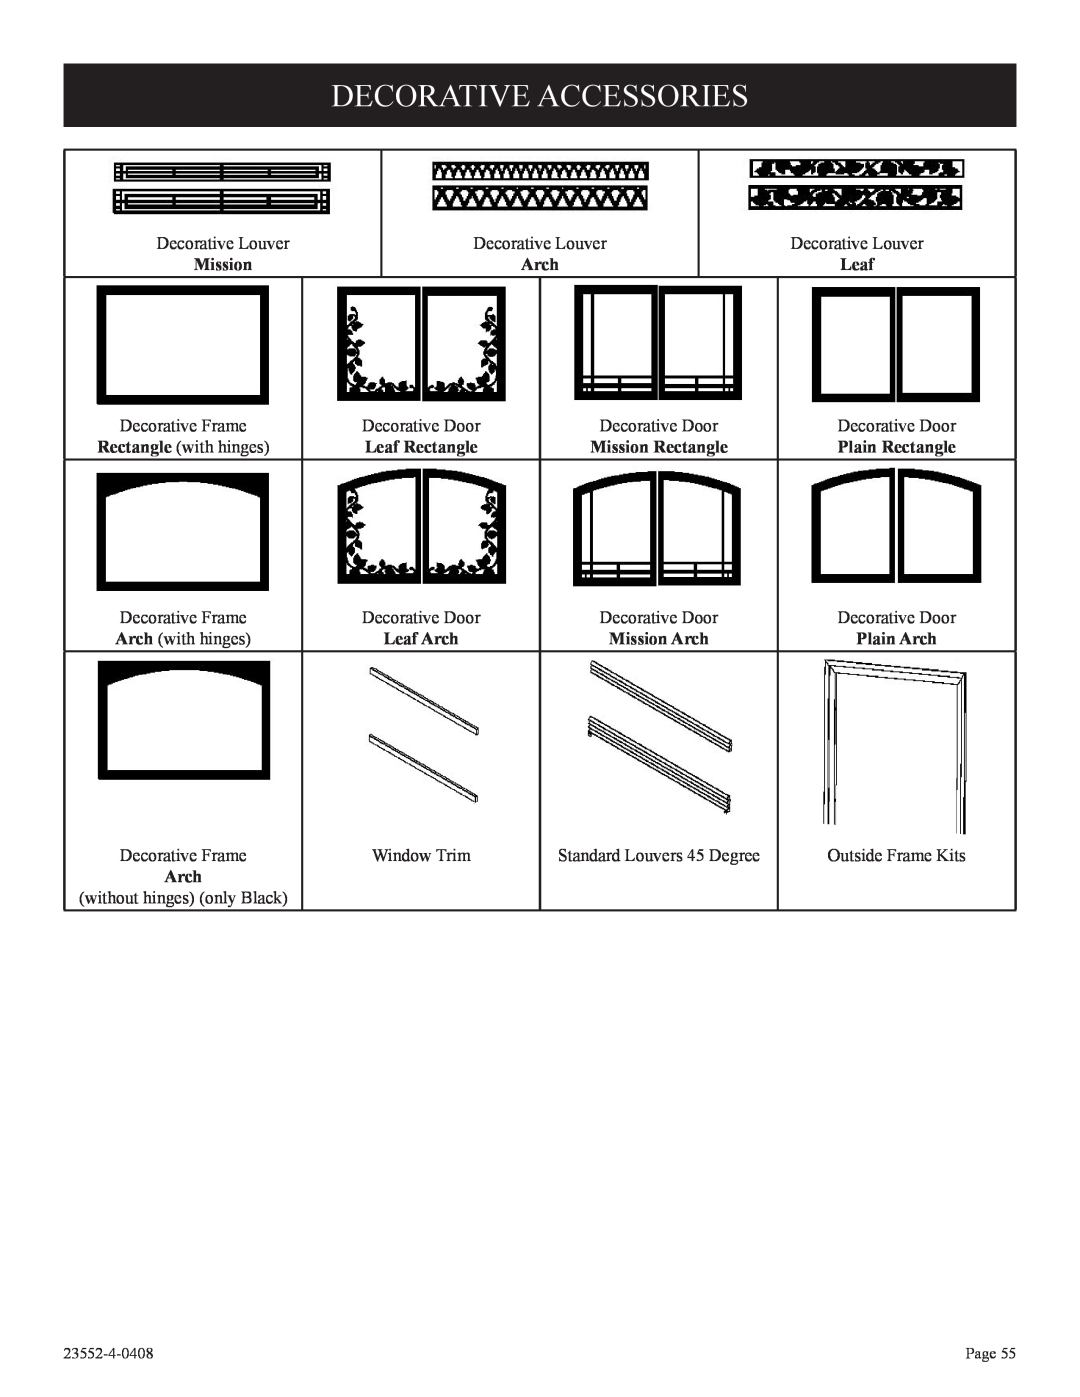 Empire Comfort Systems 3)(N, 1, 2 Decorative Accessories, Arch, Leaf Rectangle, Mission Rectangle, Plain Rectangle 